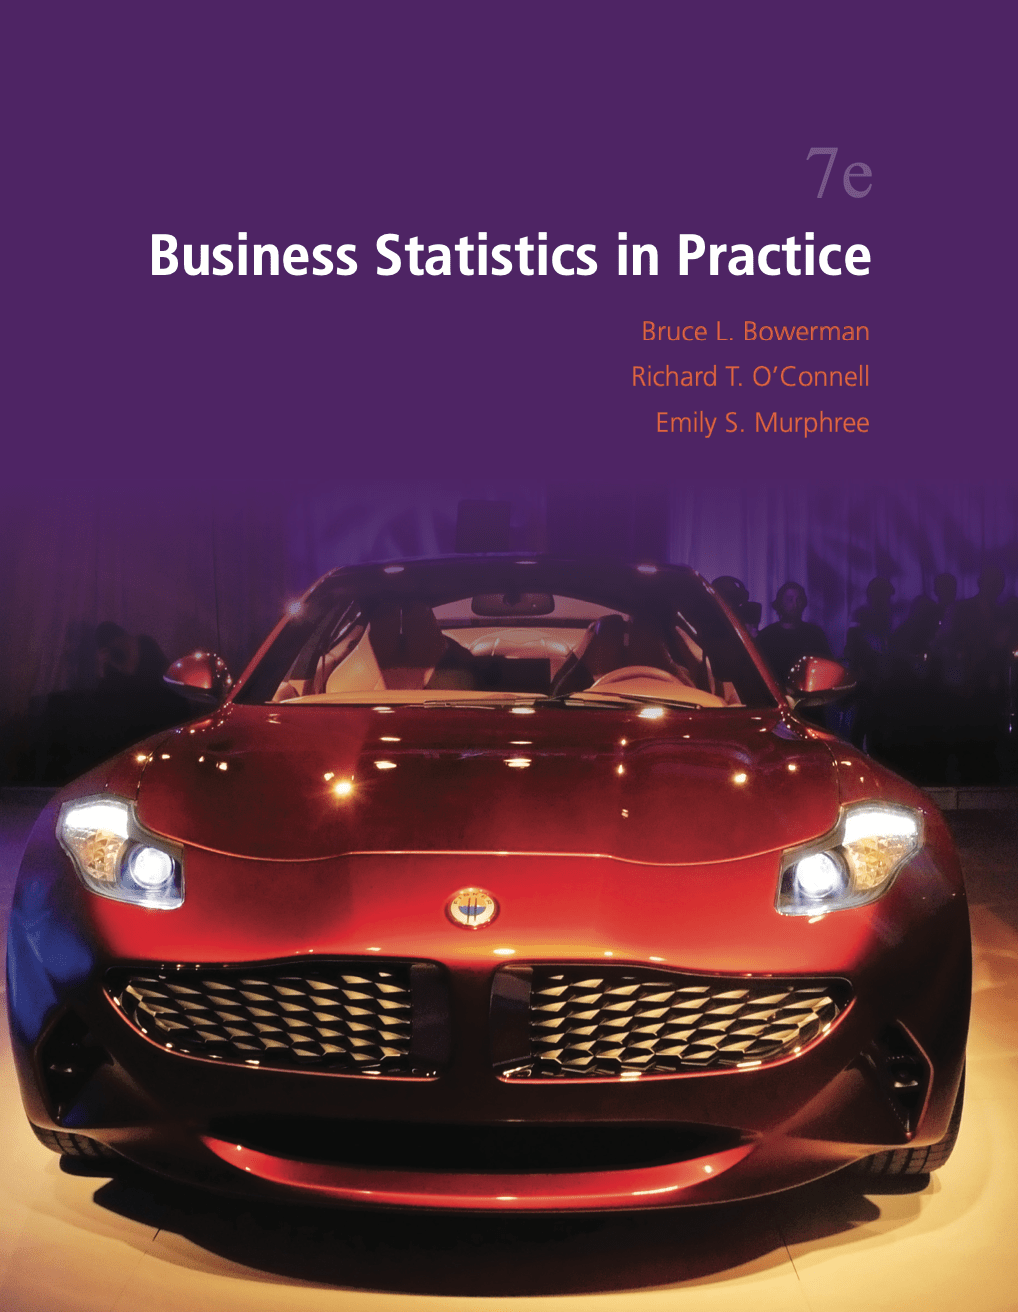 Business Statistics in Practice read online at BusinessBooks.cc